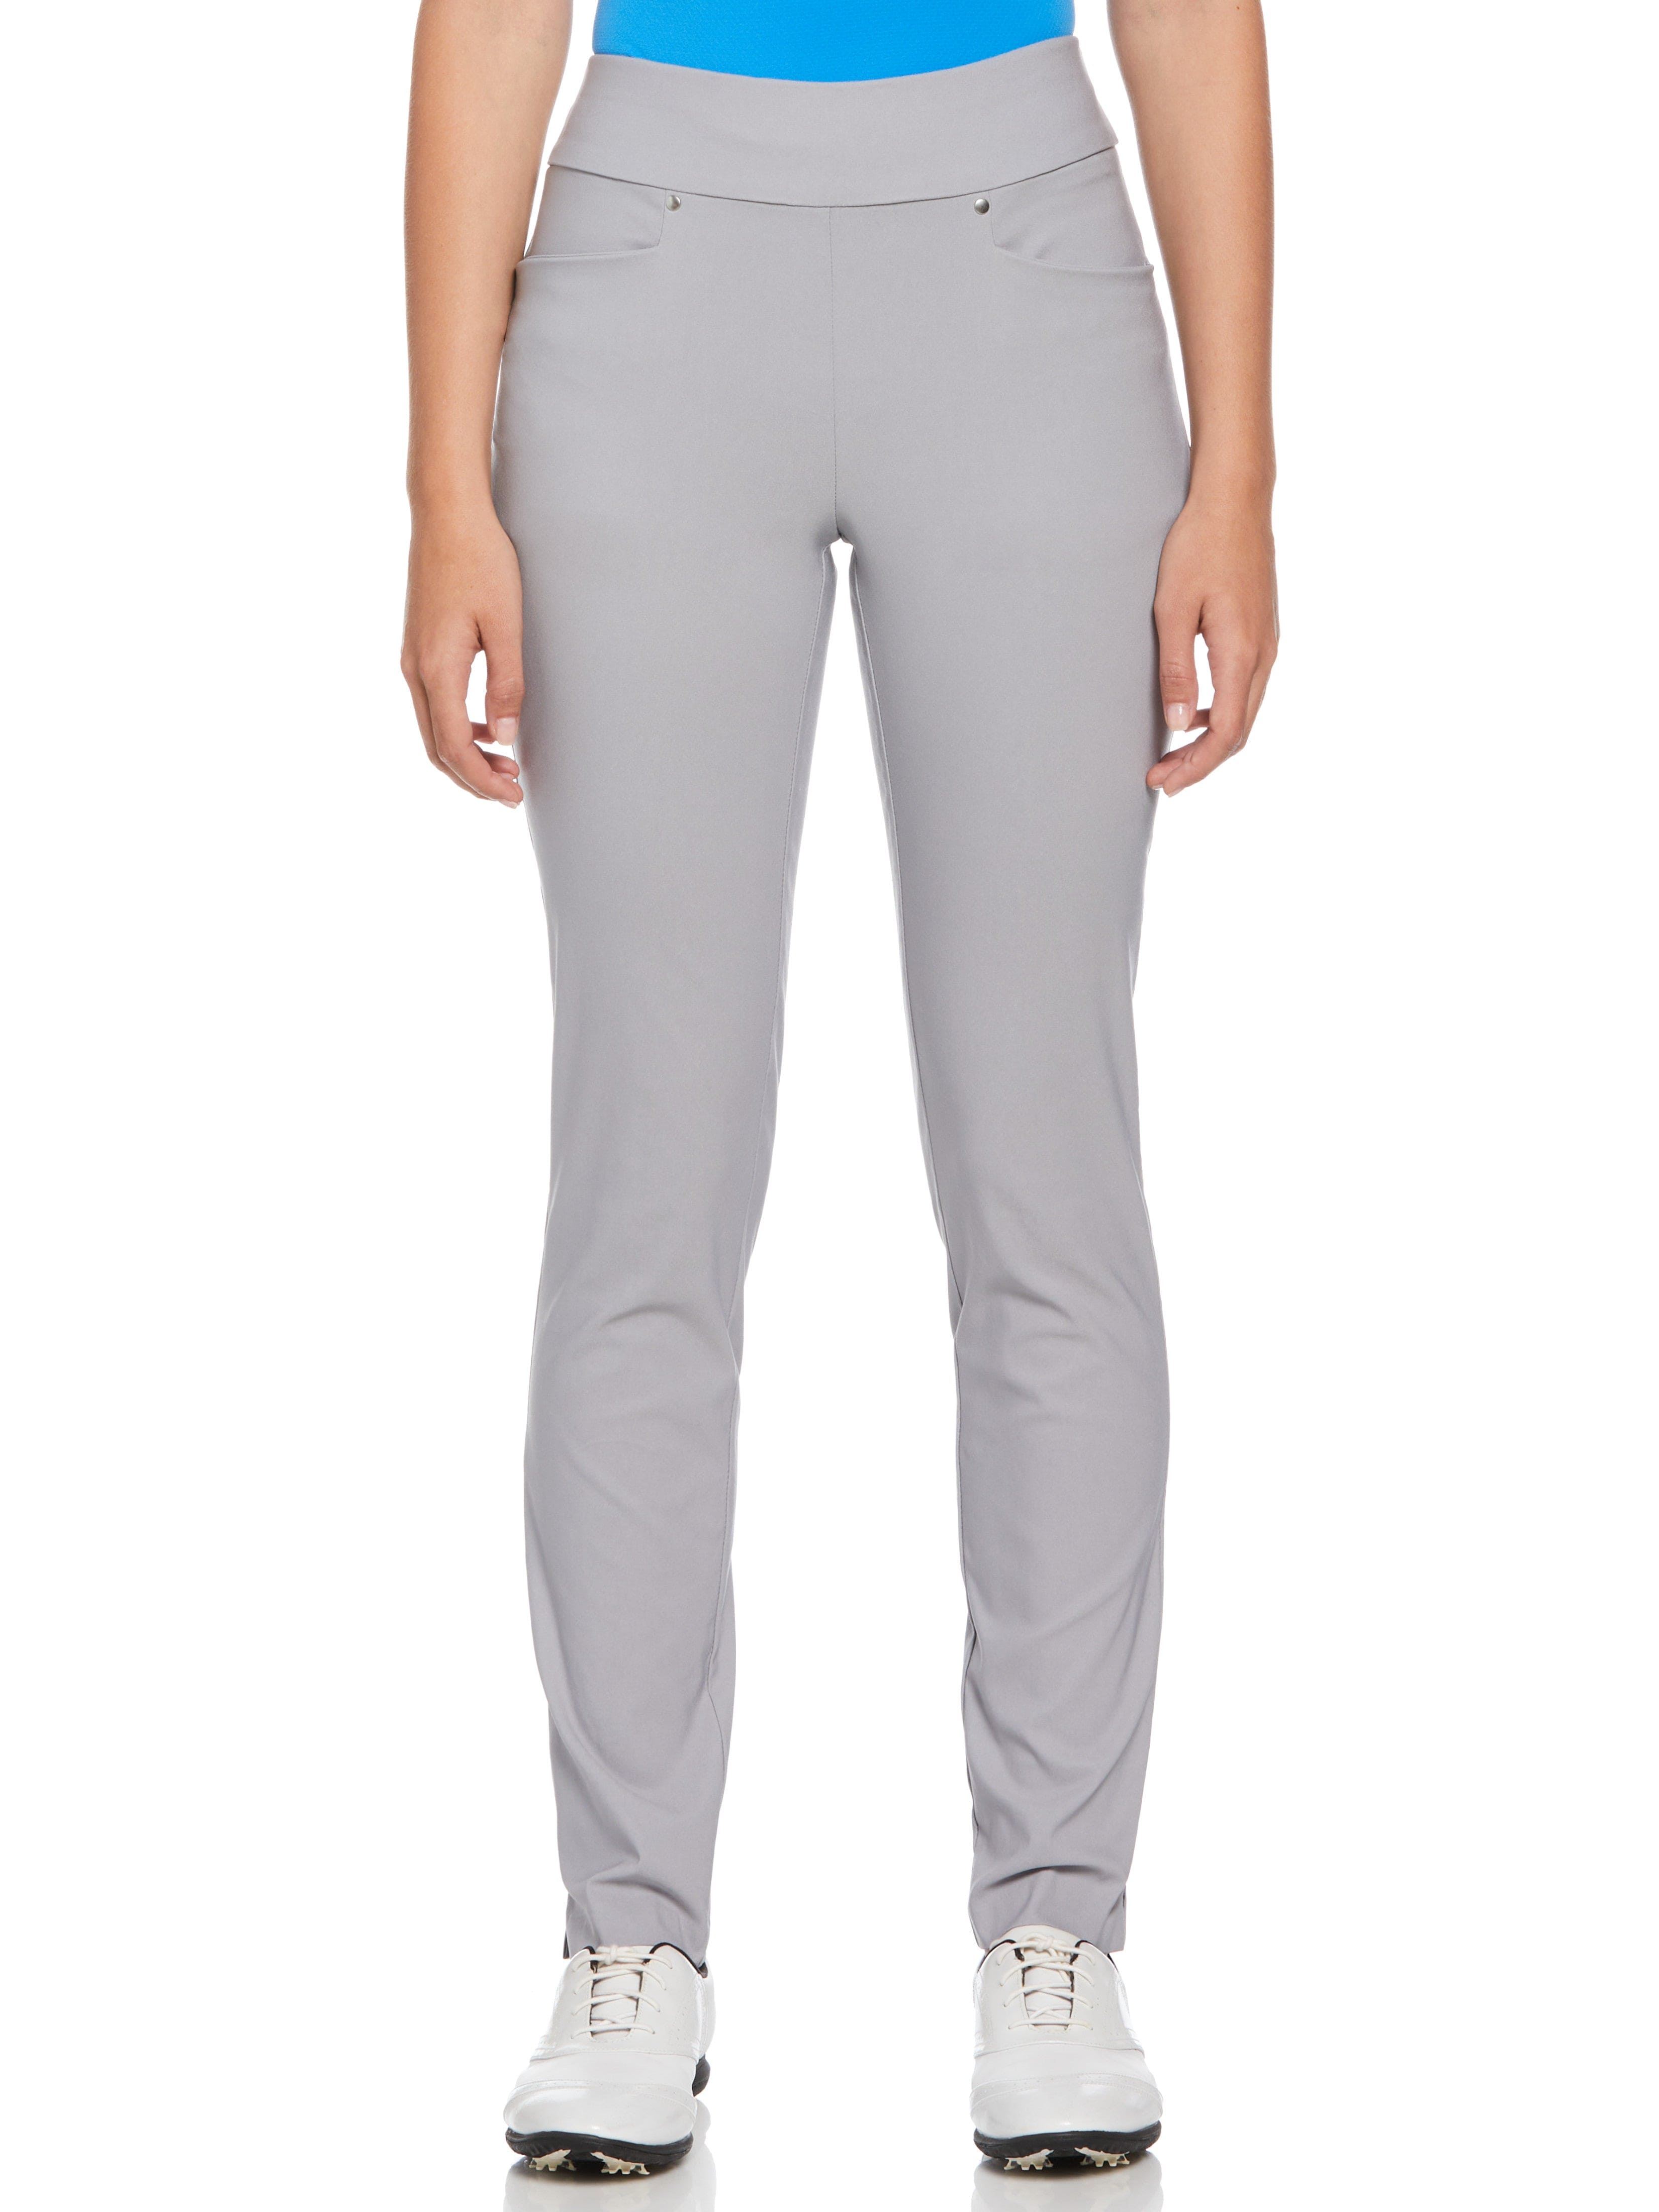 Womens Stretch Pull On Pant